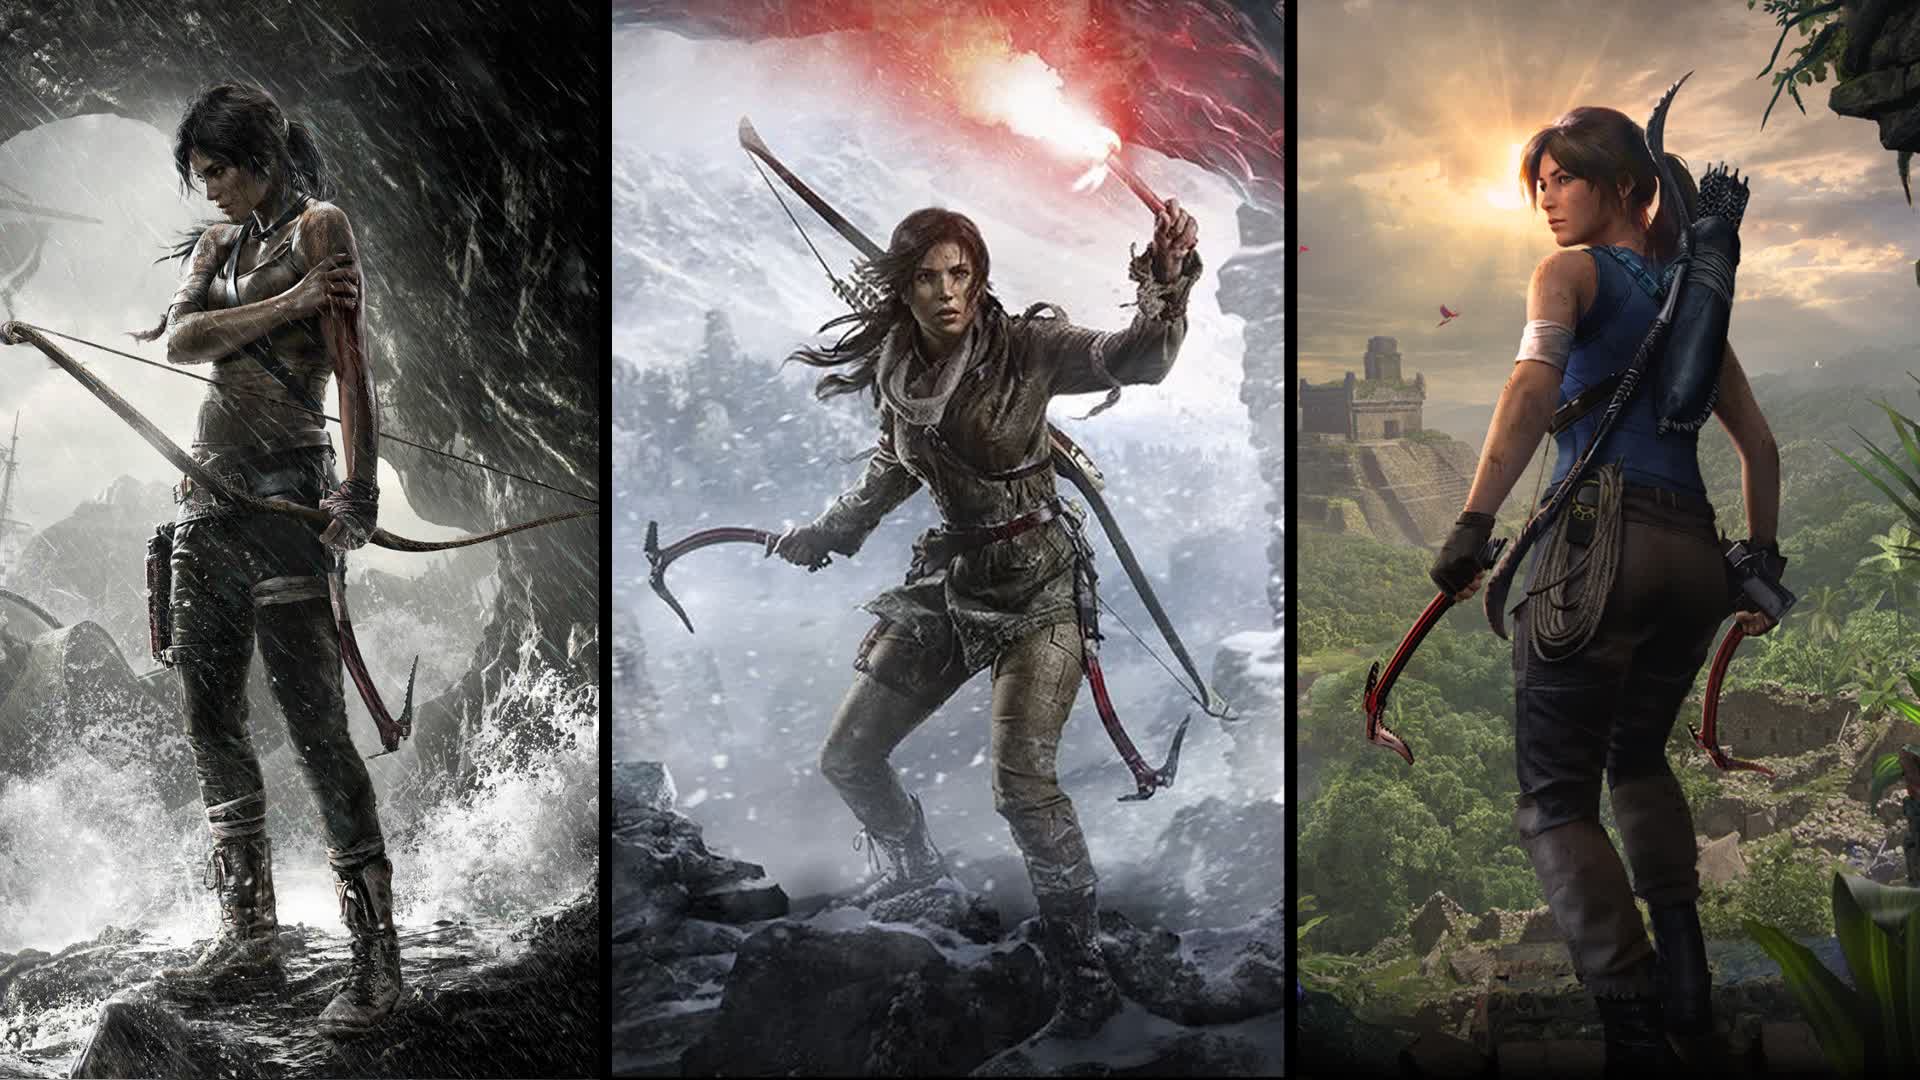 Epic is giving away the entire Tomb Raider trilogy